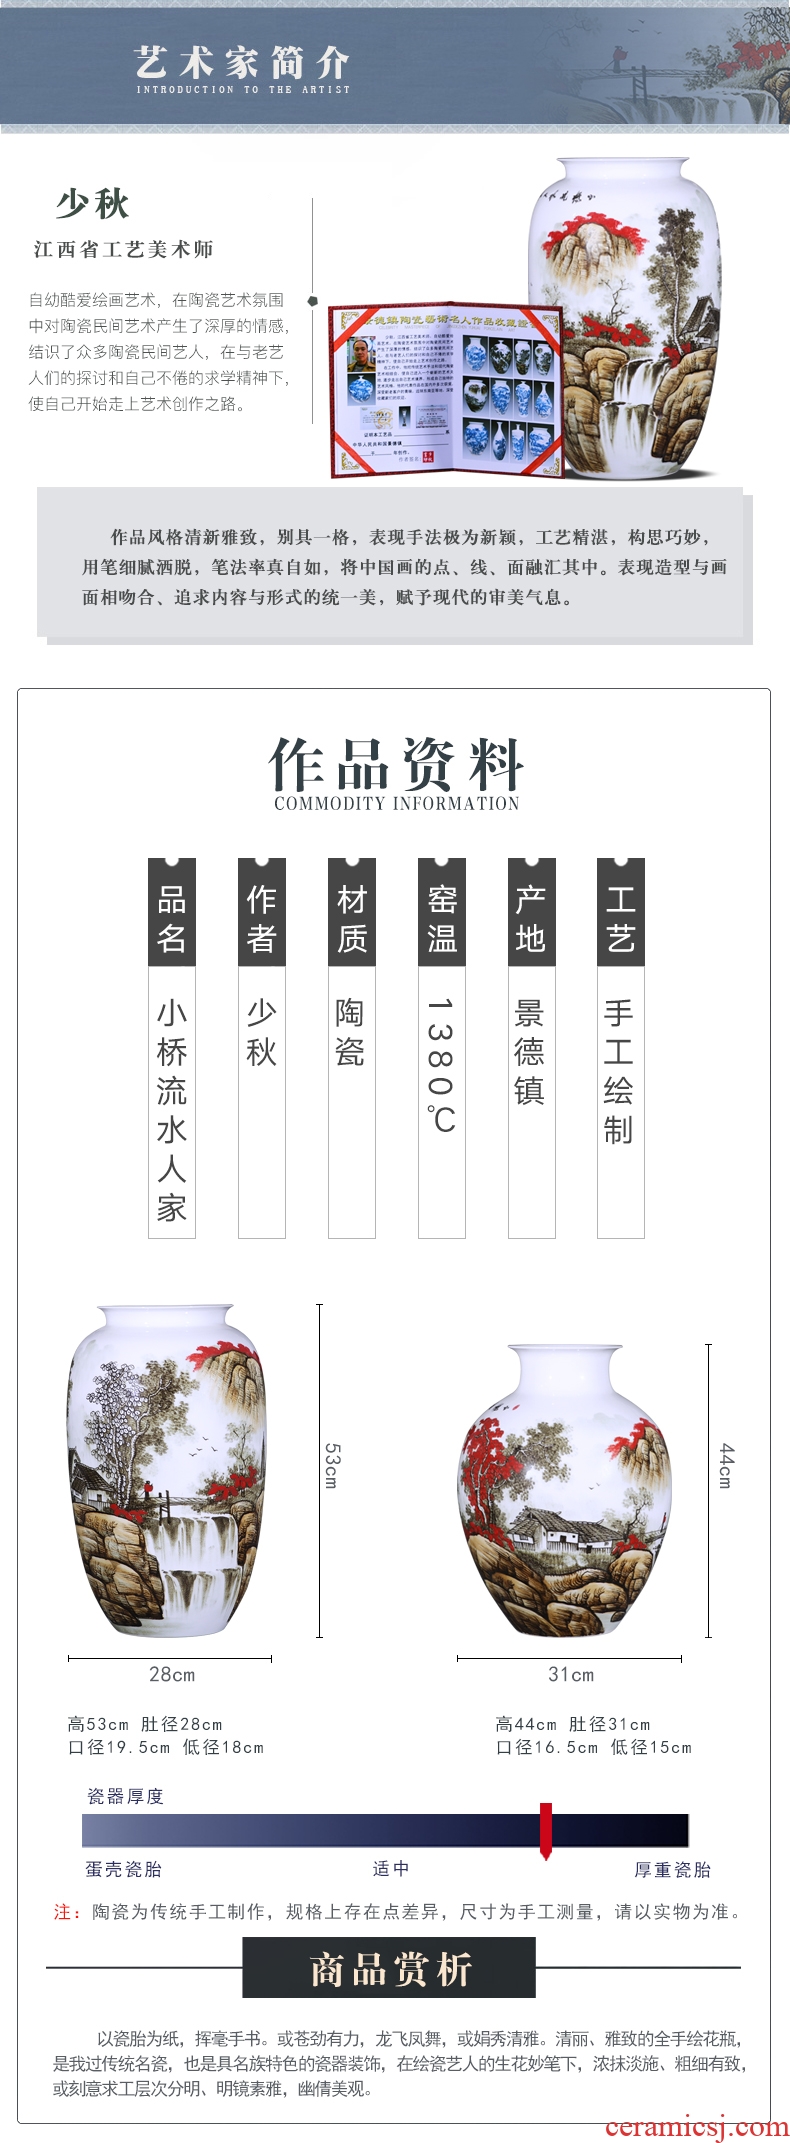 Better sealed up with archaize sitting room of new Chinese style ceramic furnishing articles large sitting room jingdezhen porcelain of goddess of mercy bottle vase household - 560300250884